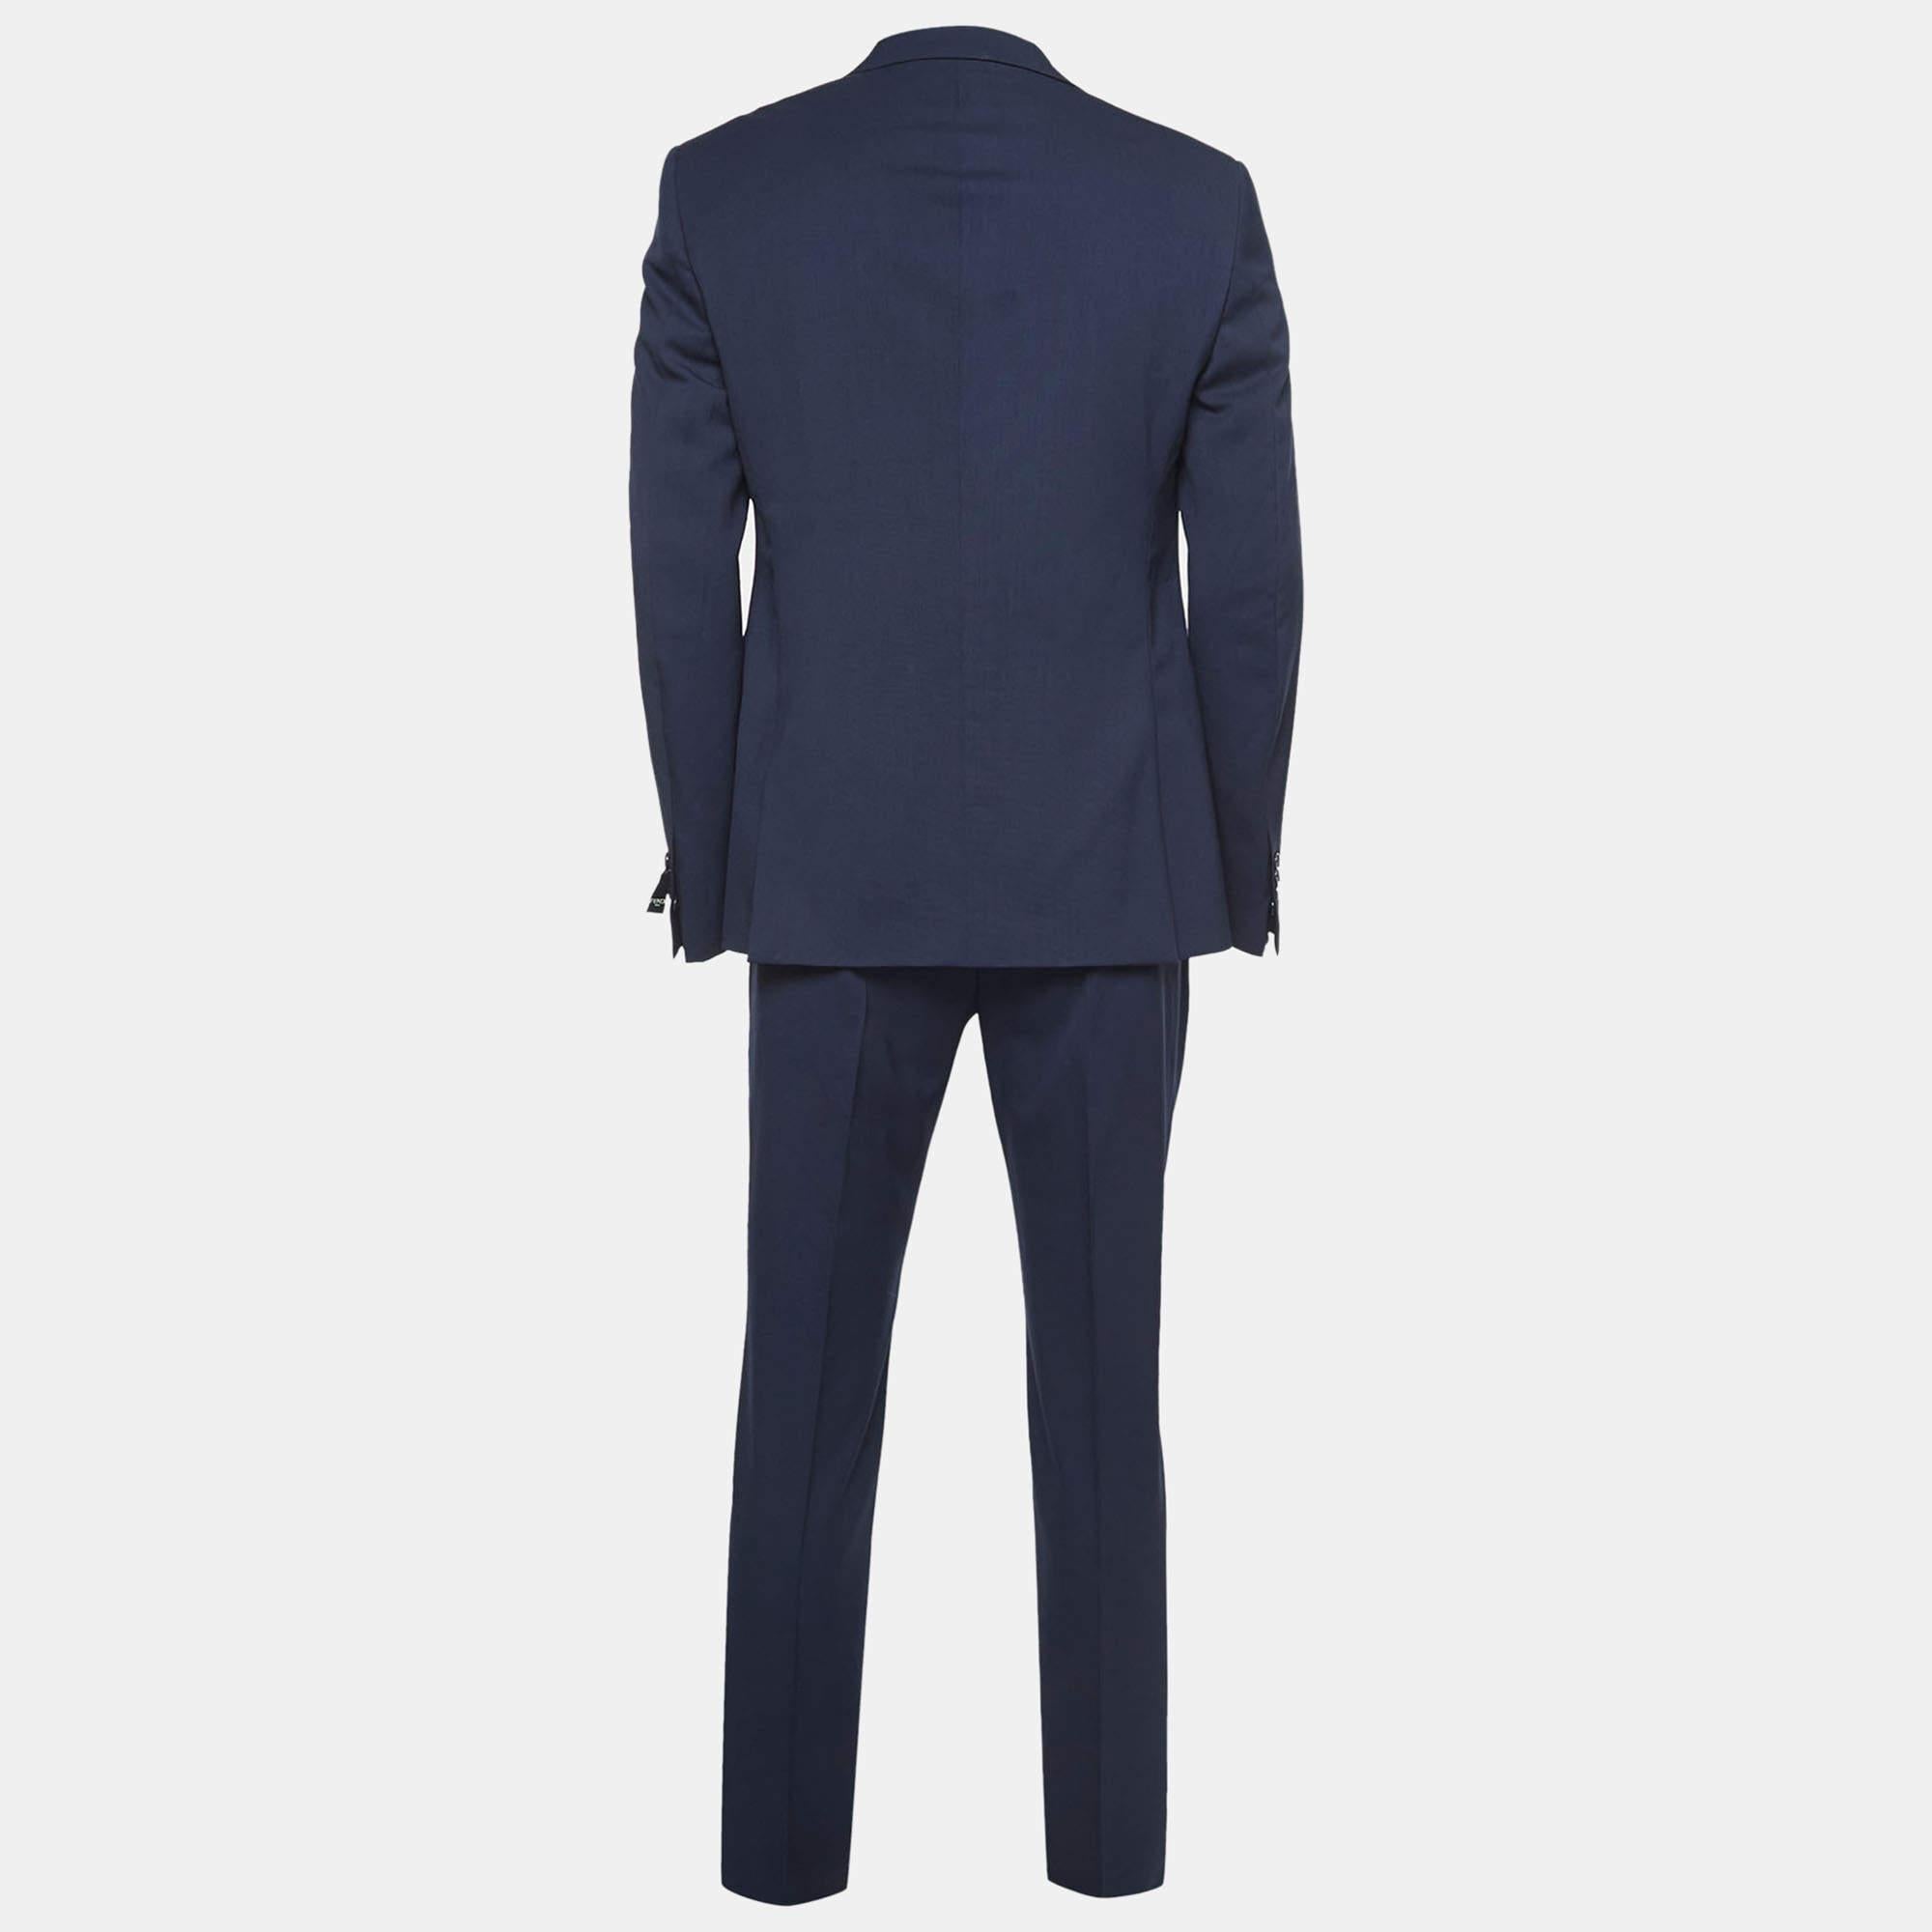 Characterized by impeccable tailoring, a good fit, and the use of quality materials, this suit set will help you serve dapper looks. Style it with oxfords or loafers to bring out the stylish appeal of the creation.

Includes
Original Dustbag, Brand